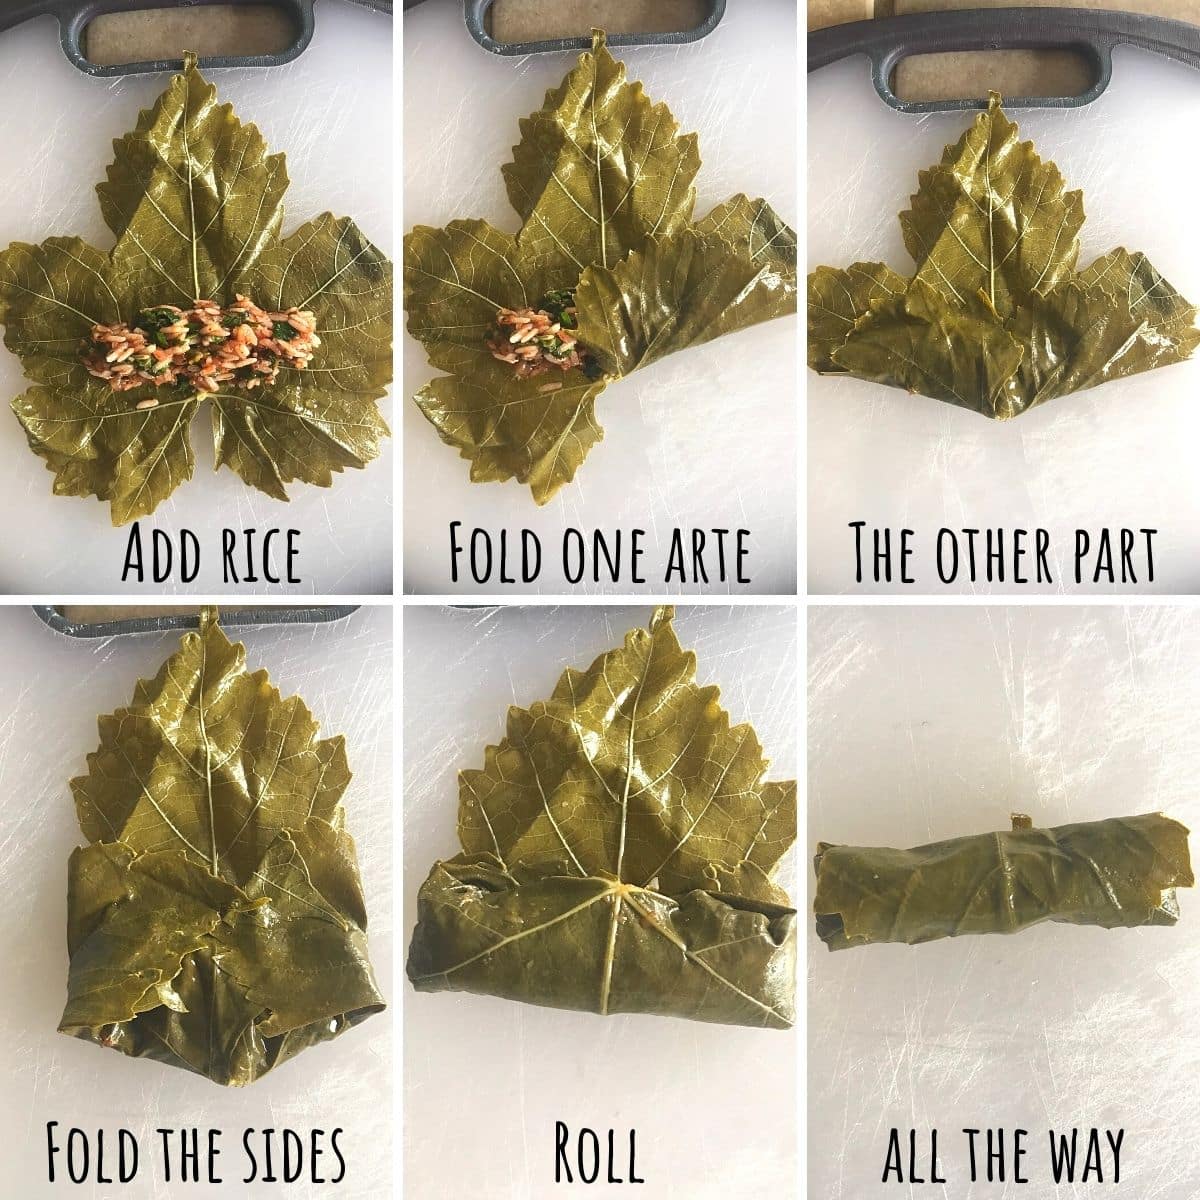 A collage of 6 images showing how to roll warak enab.